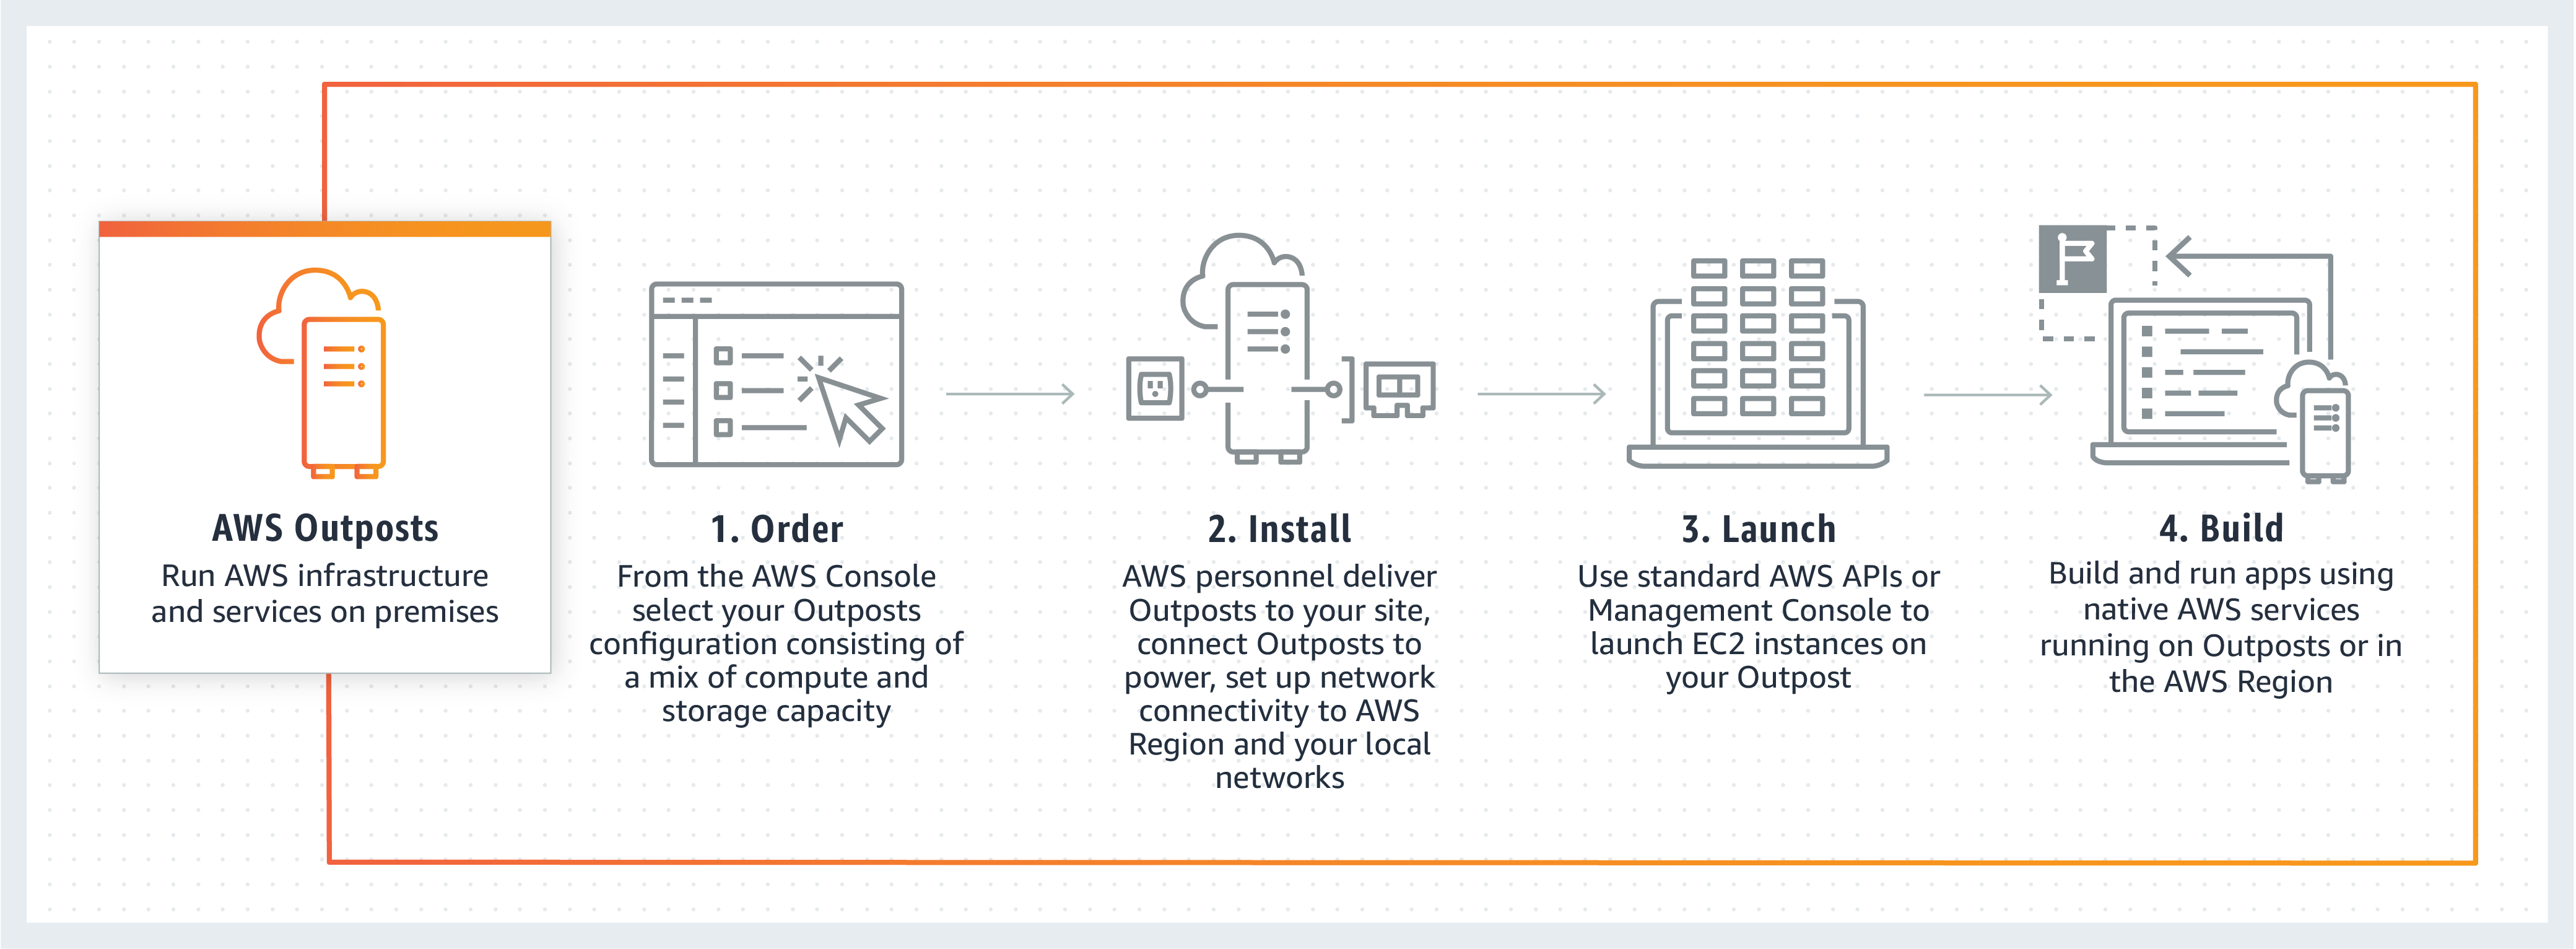 AWS Outposts - How it works.